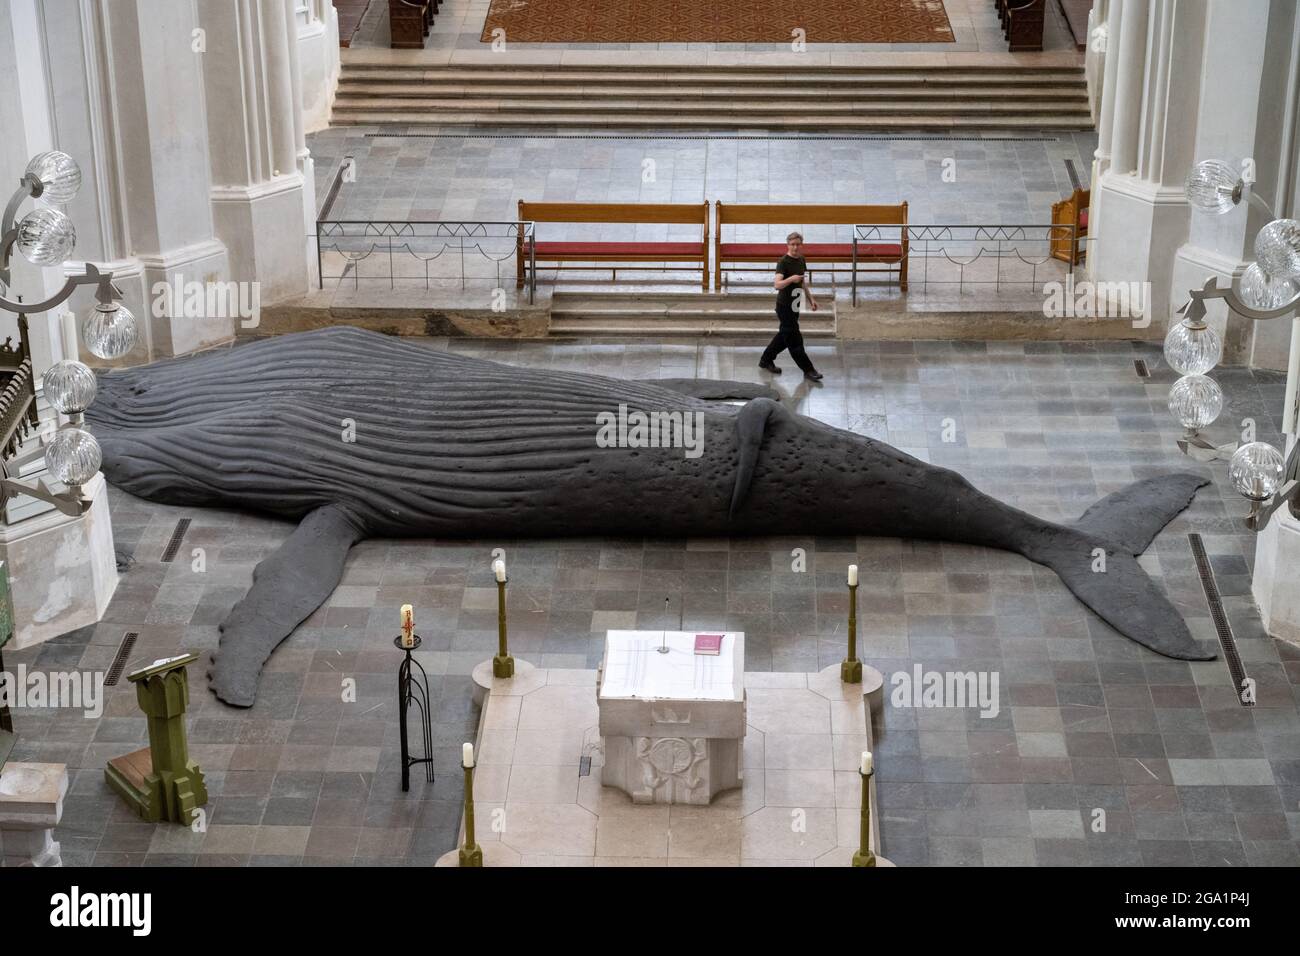 Greifswald, Germany. 28th July, 2021. Gil Shachar, an artist from Isarel,  is setting up a whale sculpture of a humpback whale in St. Nicholas  Cathedral. The 14-metre-long whale sculpture is a cast